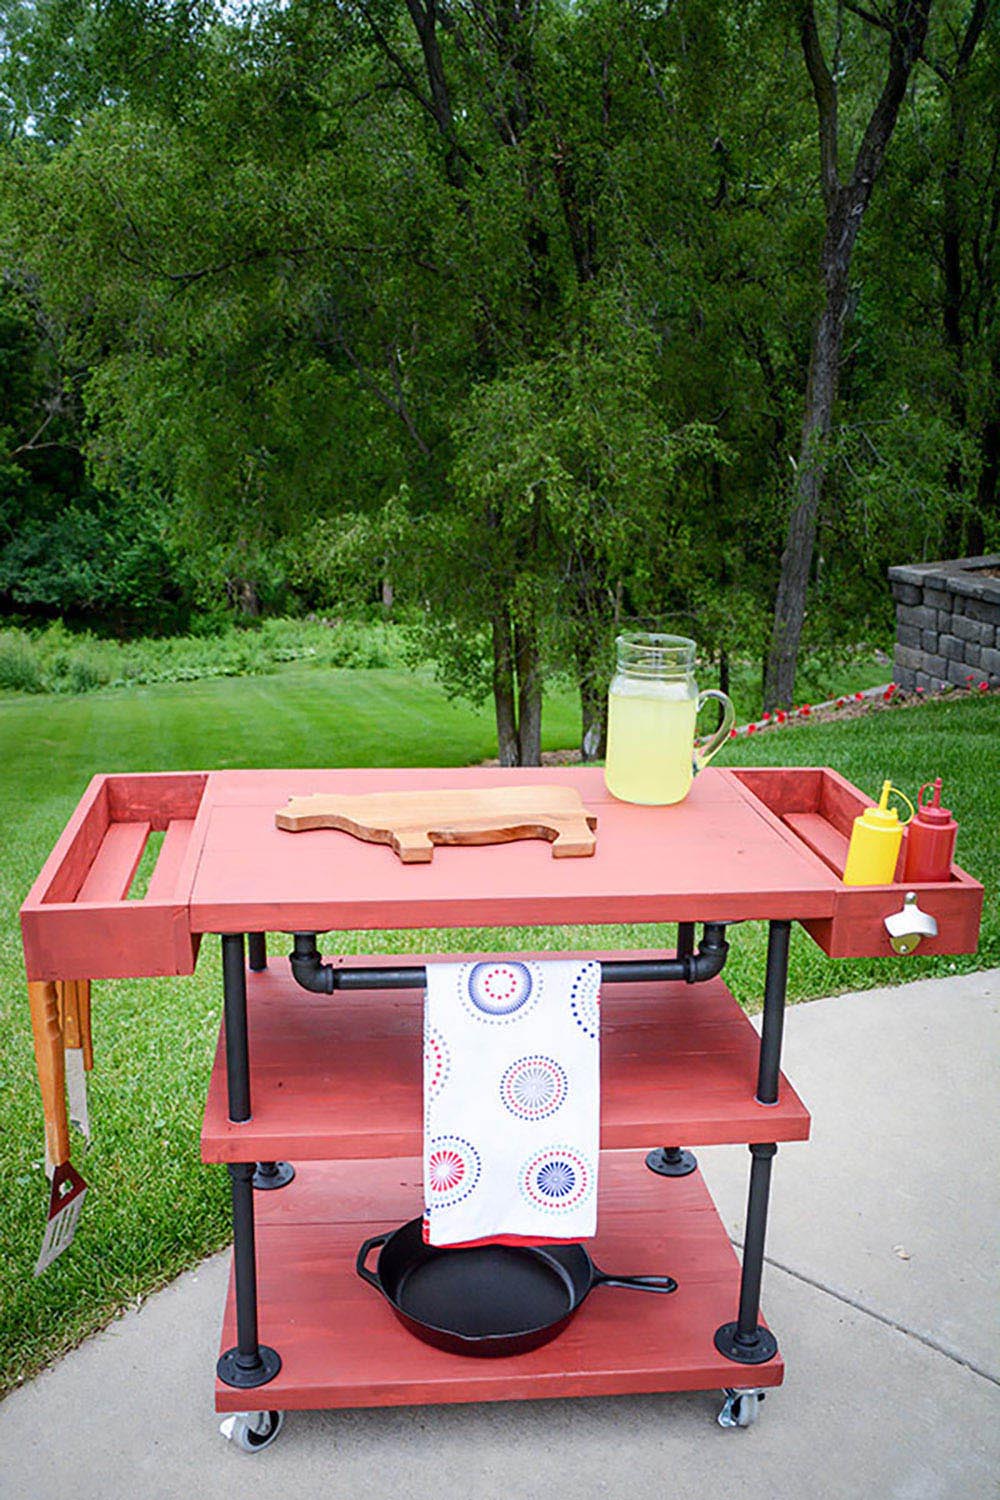 A DIY grill cart with side trays and a bottle opener on the side.